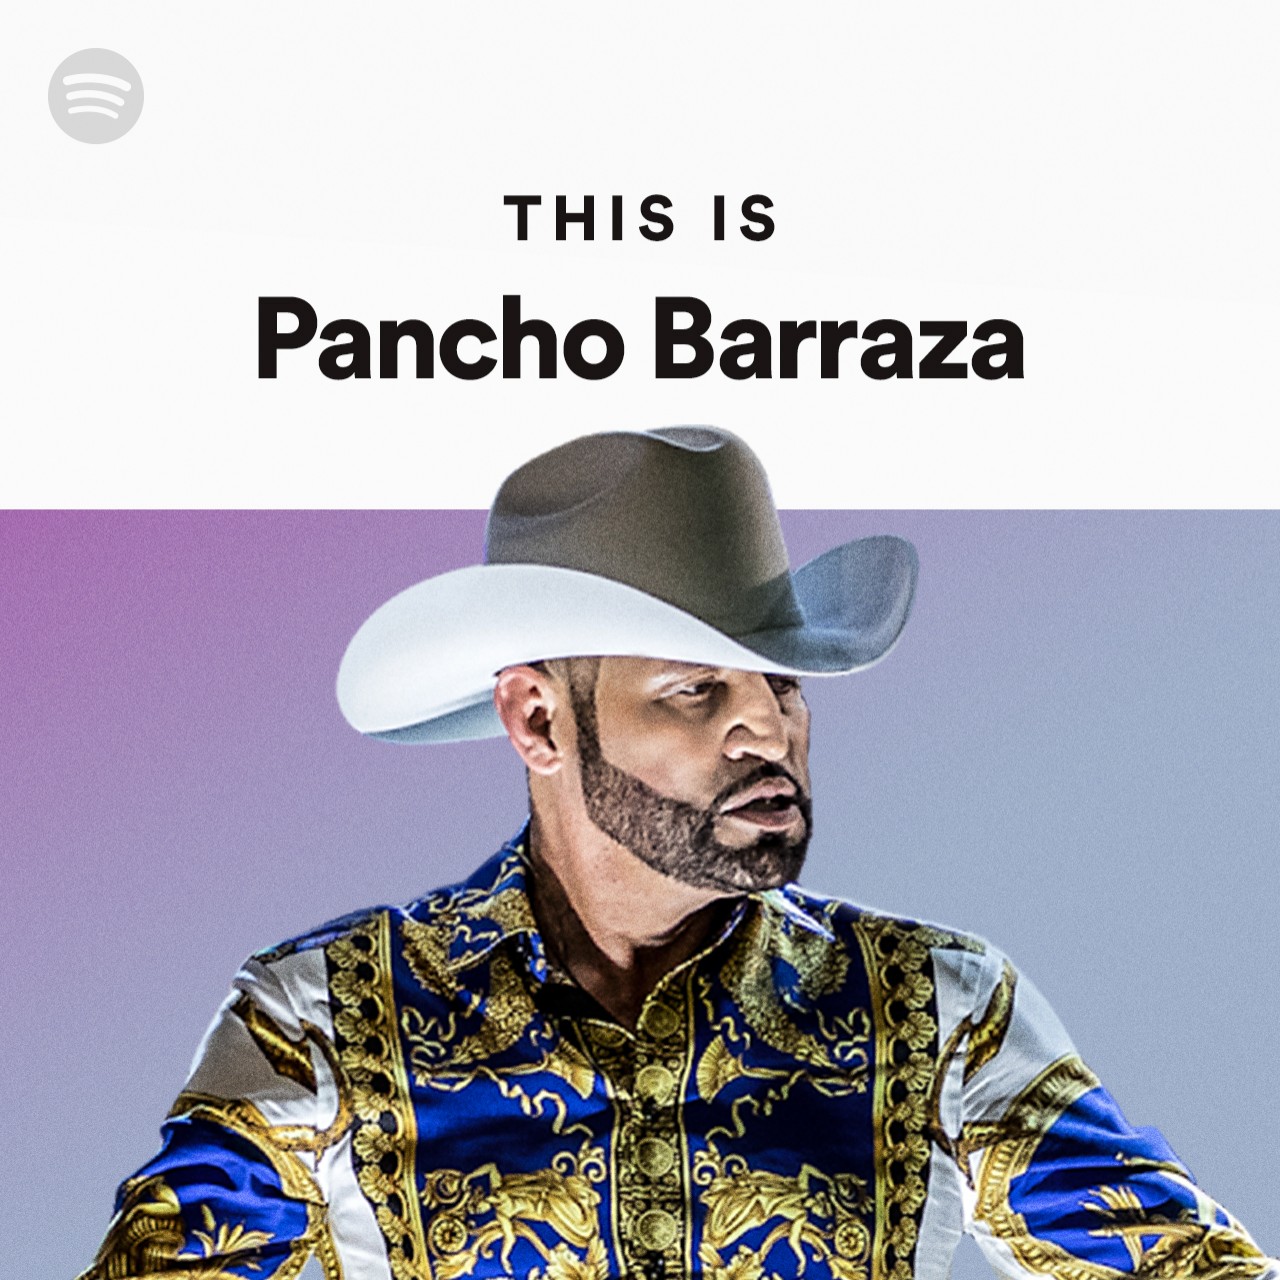 This Is Pancho Barraza Spotify Playlist Pancho barraza new single 2017 yo estaba solo. this is pancho barraza spotify playlist